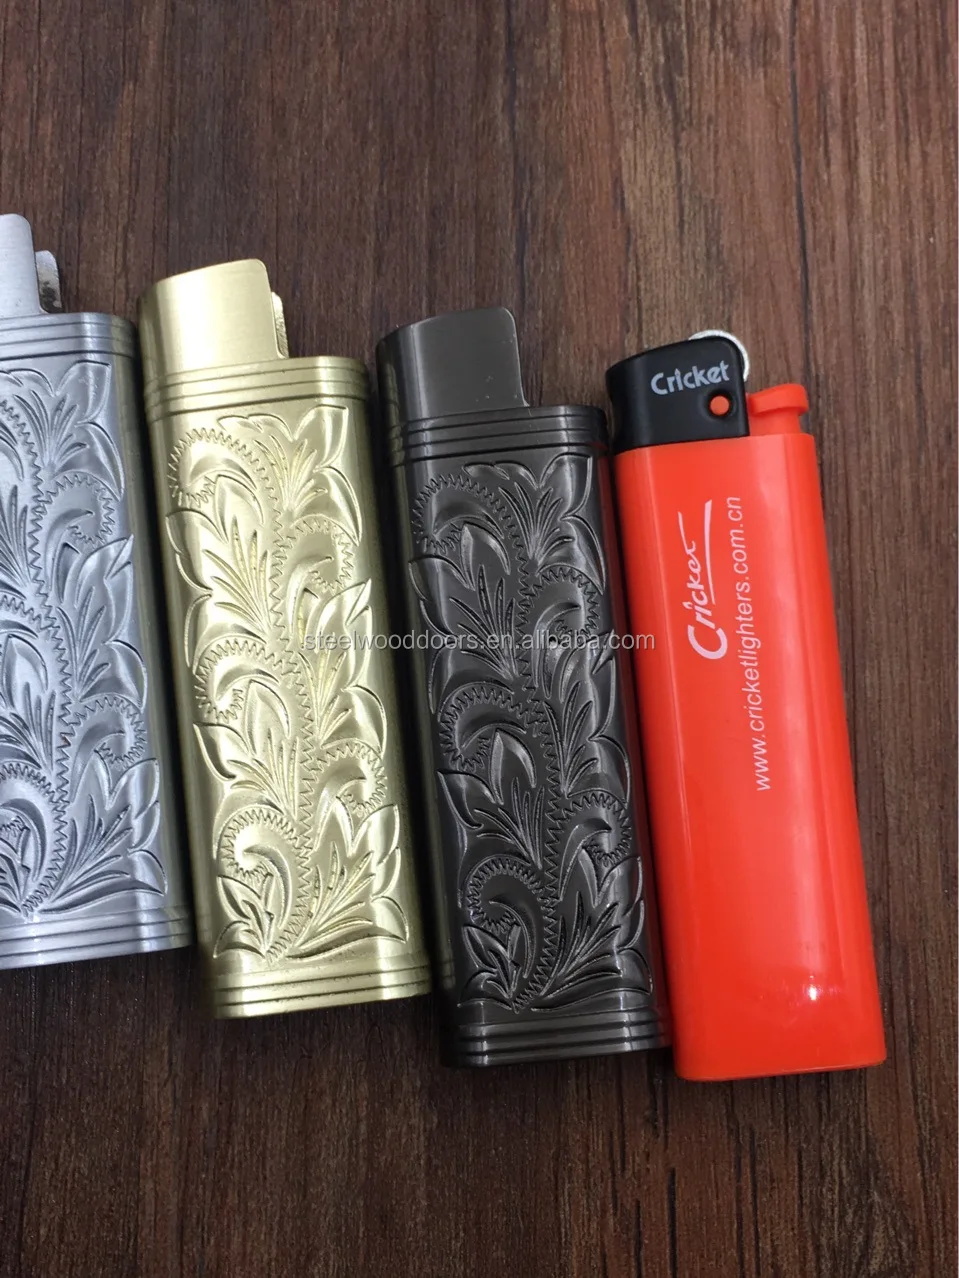 Cricket Lighters Metal Cover Case Sleeve Holder--long Style Color 